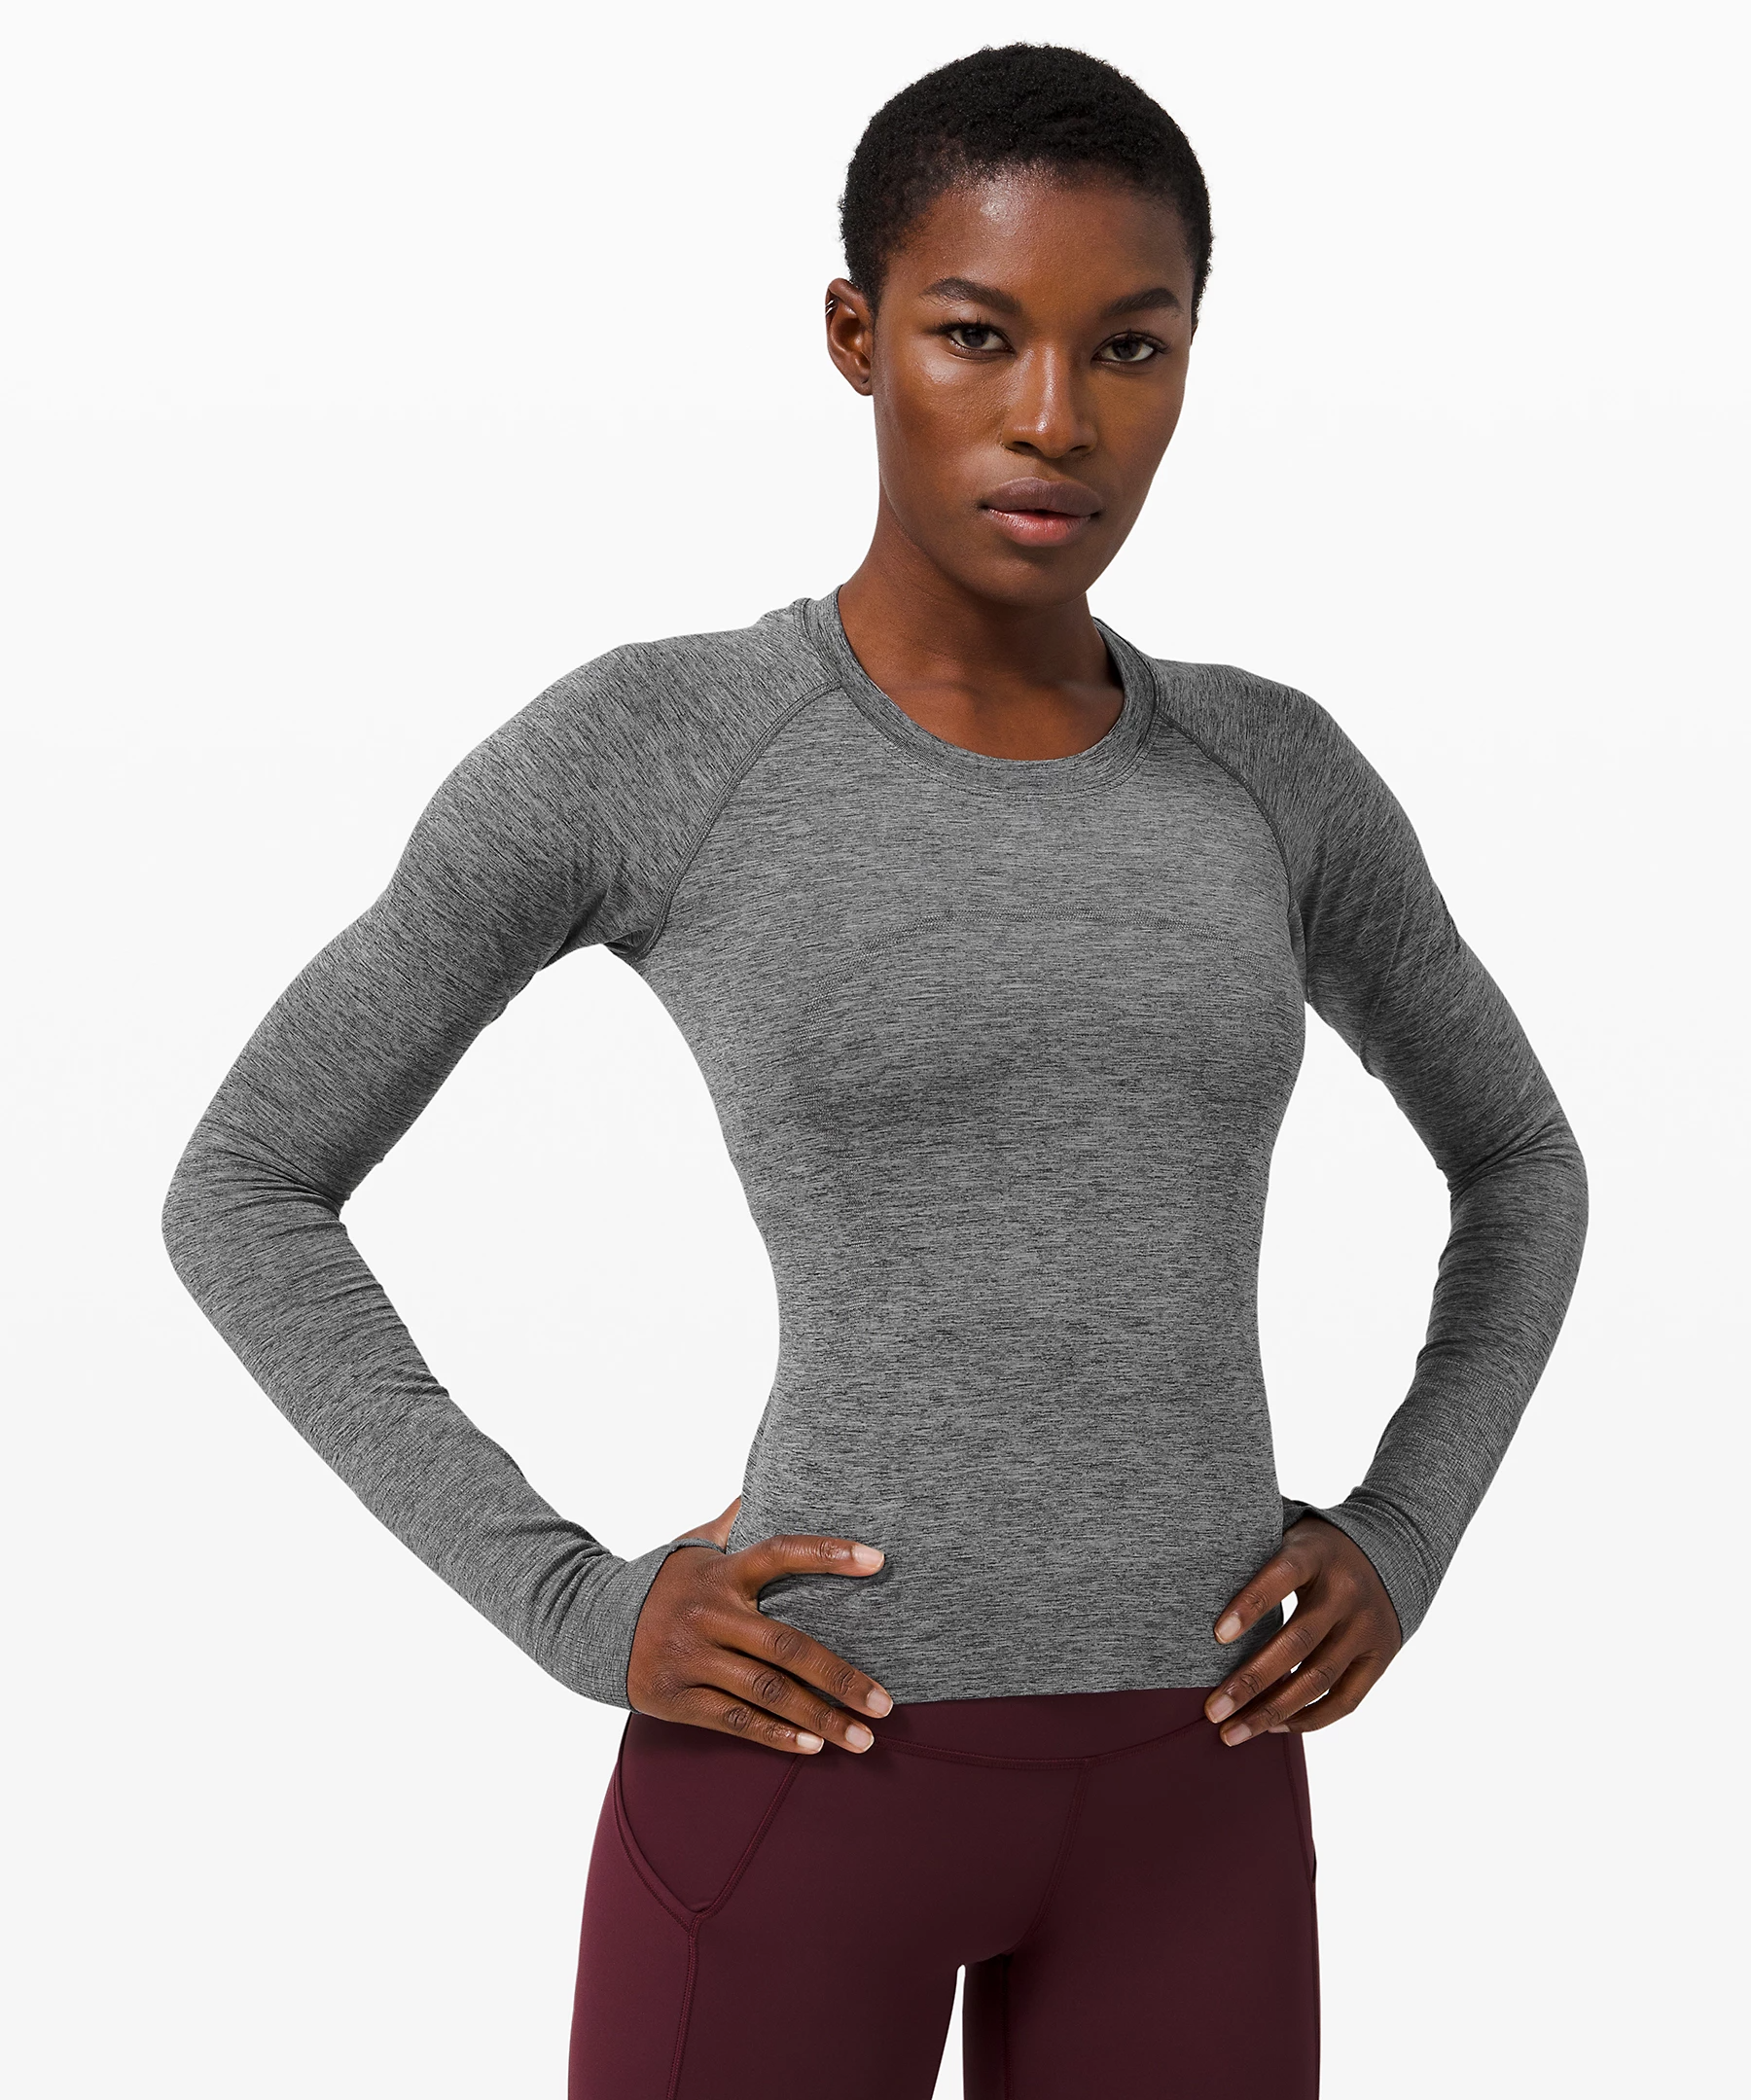 Womens Cute Workout Clothes Long Sleeve with Thumbhole Yoga Tops Exercise Gym Running Shirt